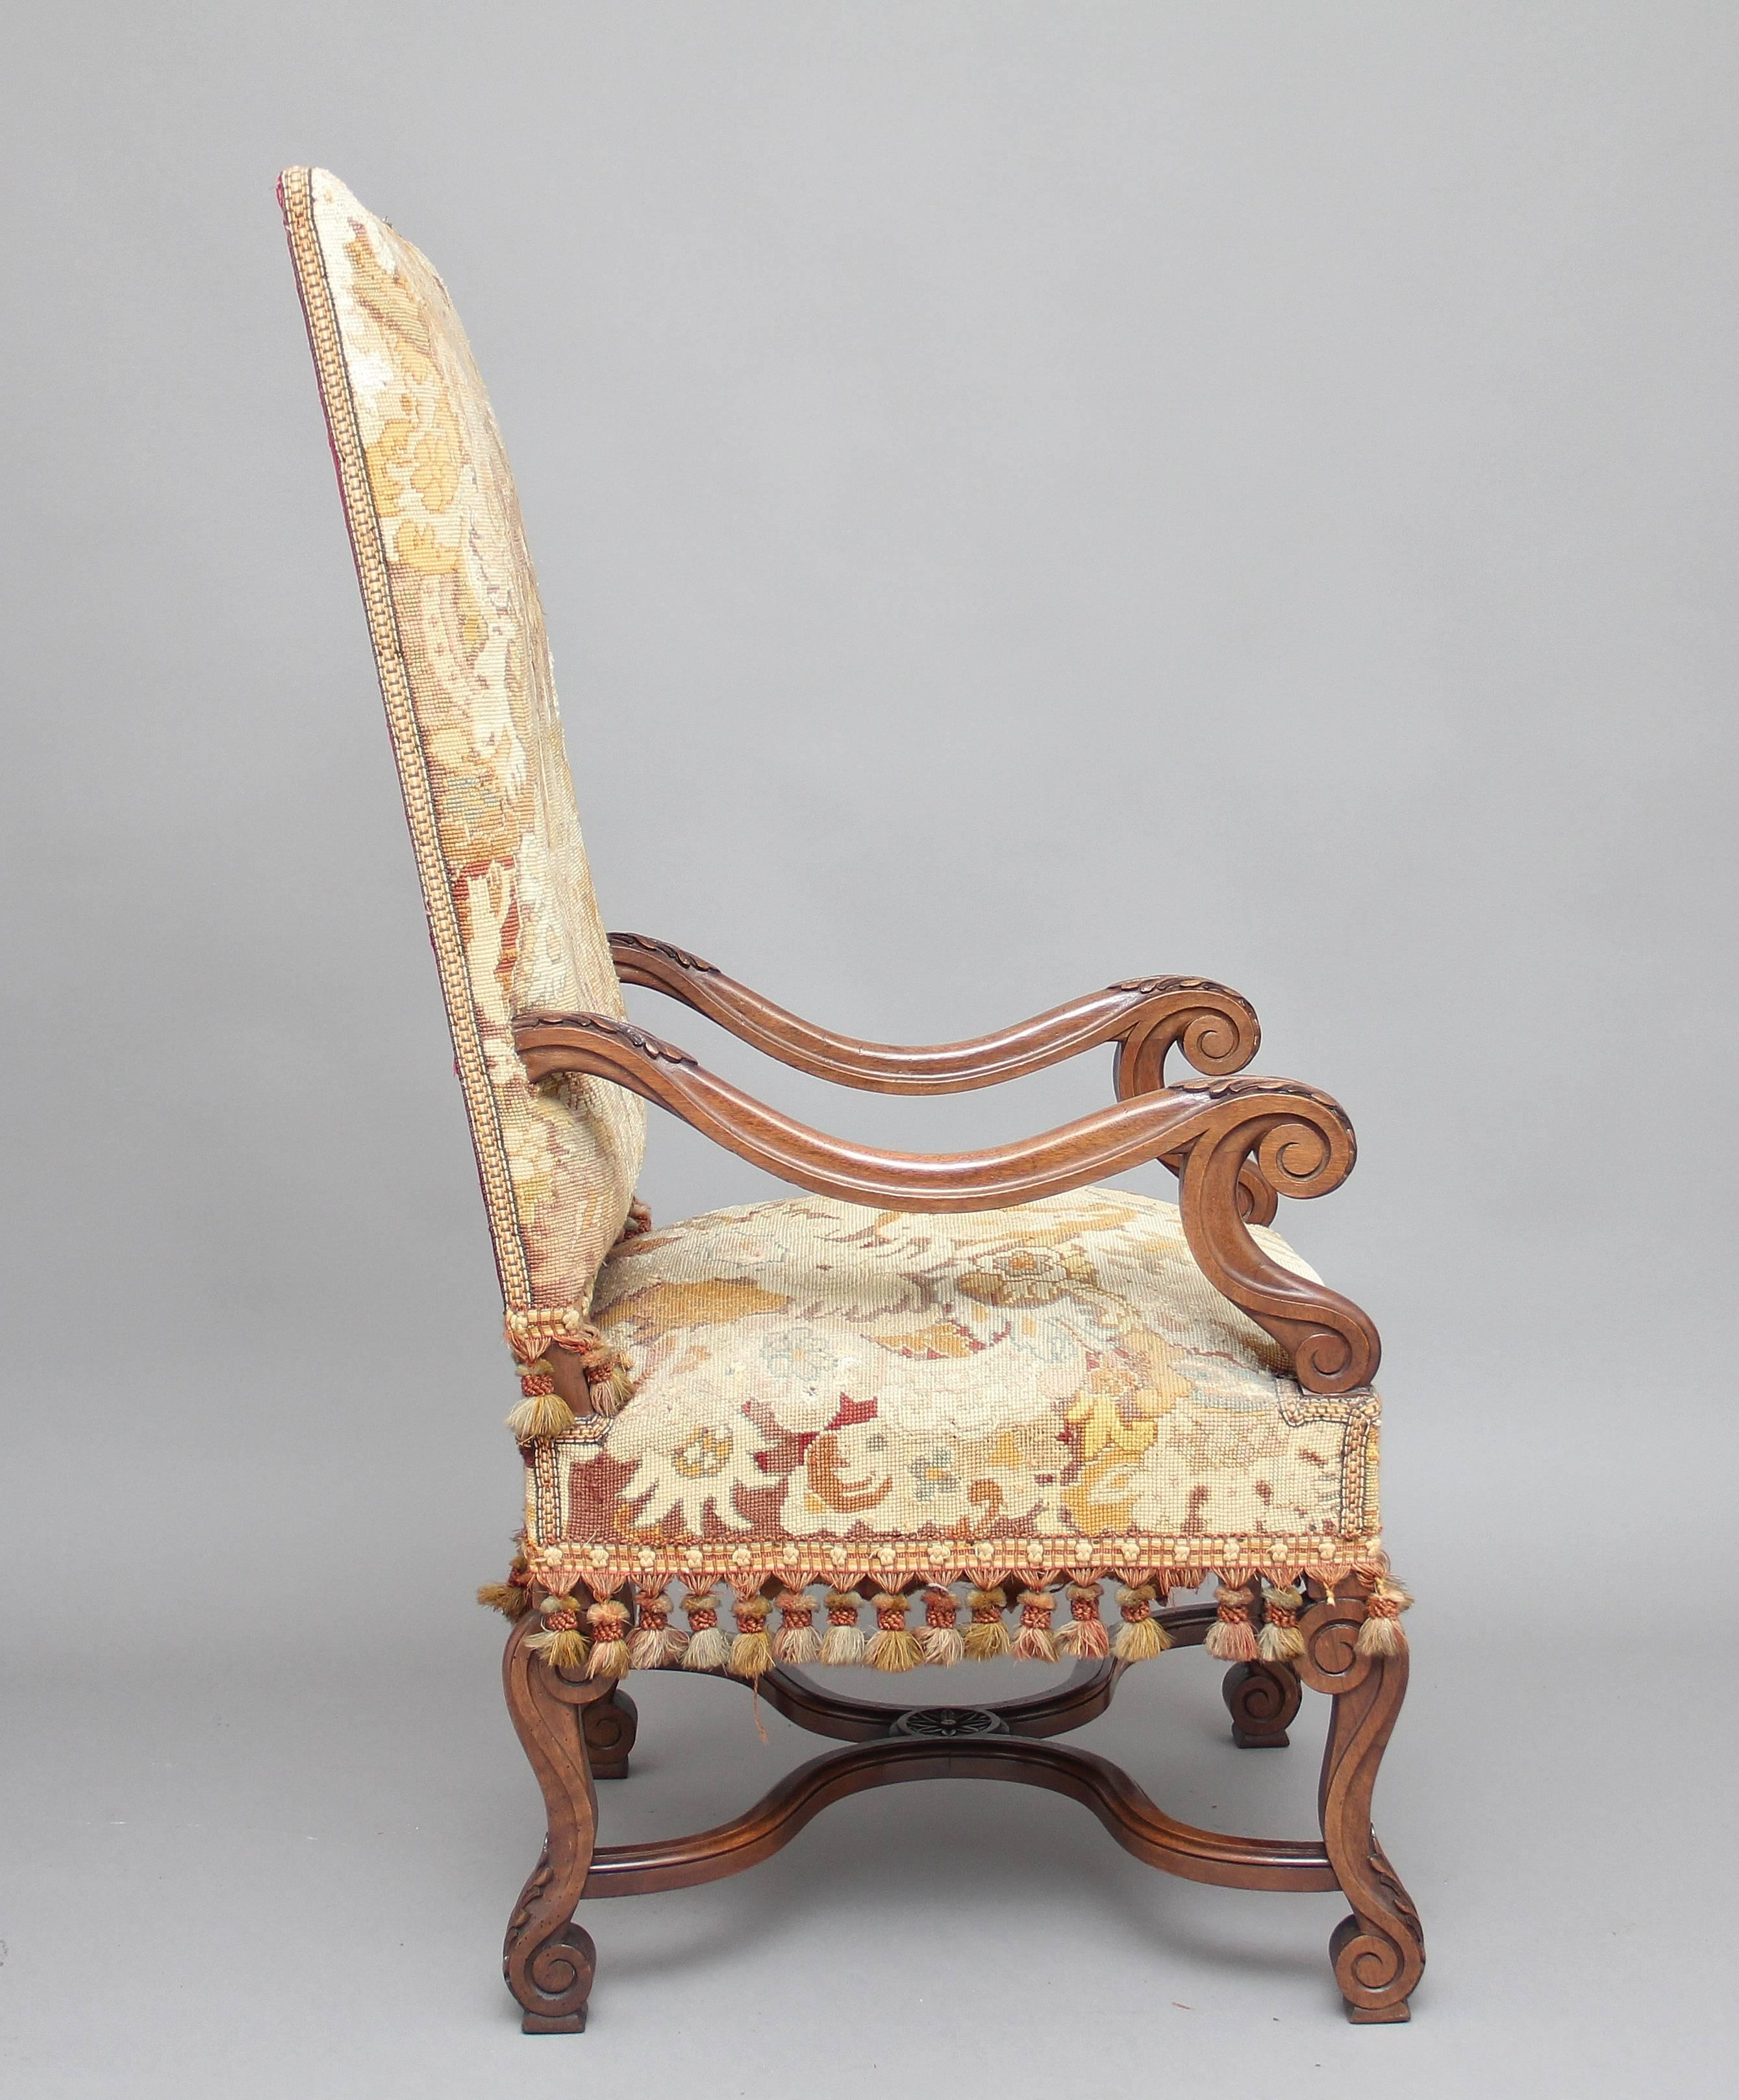 19th century French walnut high back open armchair, original tapestry upholstery of a French country side scene, shaped and carved arms with acanthus leaf decoration, supported on elegant shaped legs with carved scroll feet united by a shaped